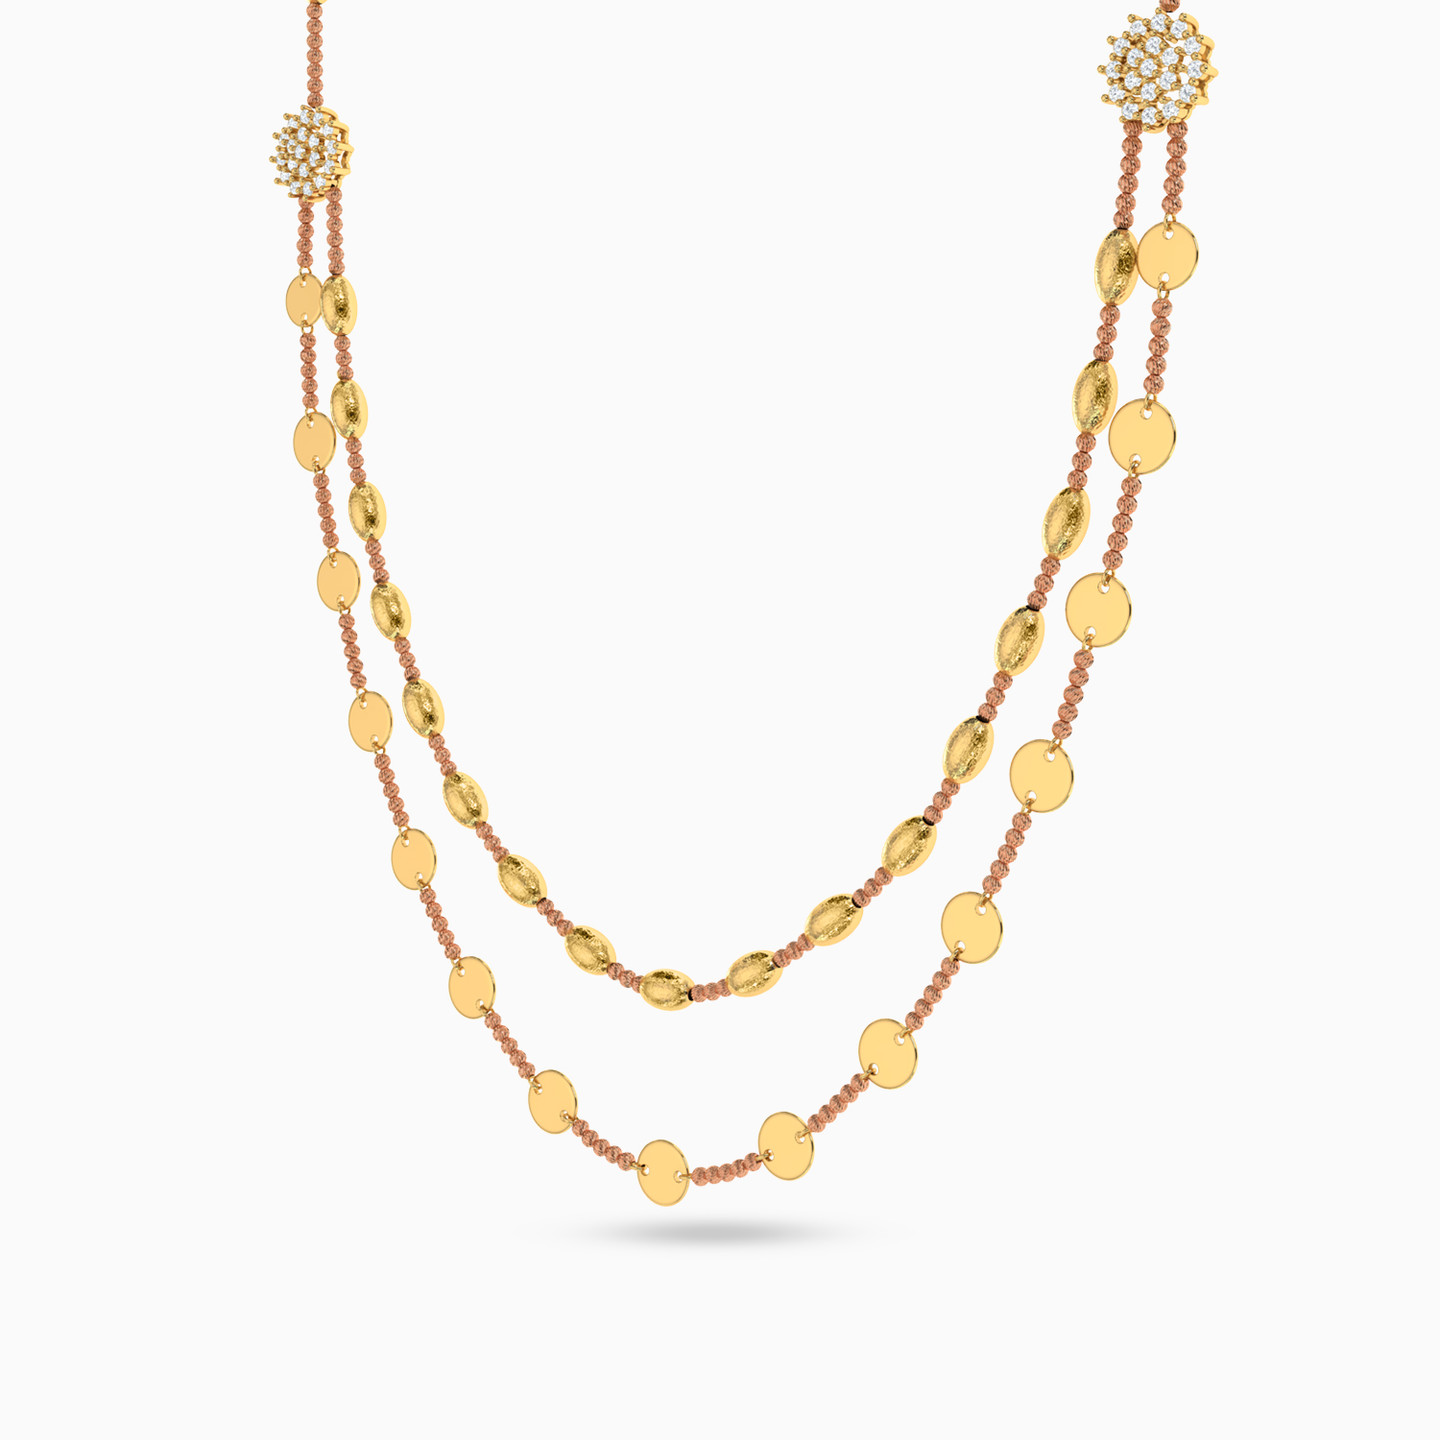 21K Gold Cubic Zirconia Layered Necklace - 2